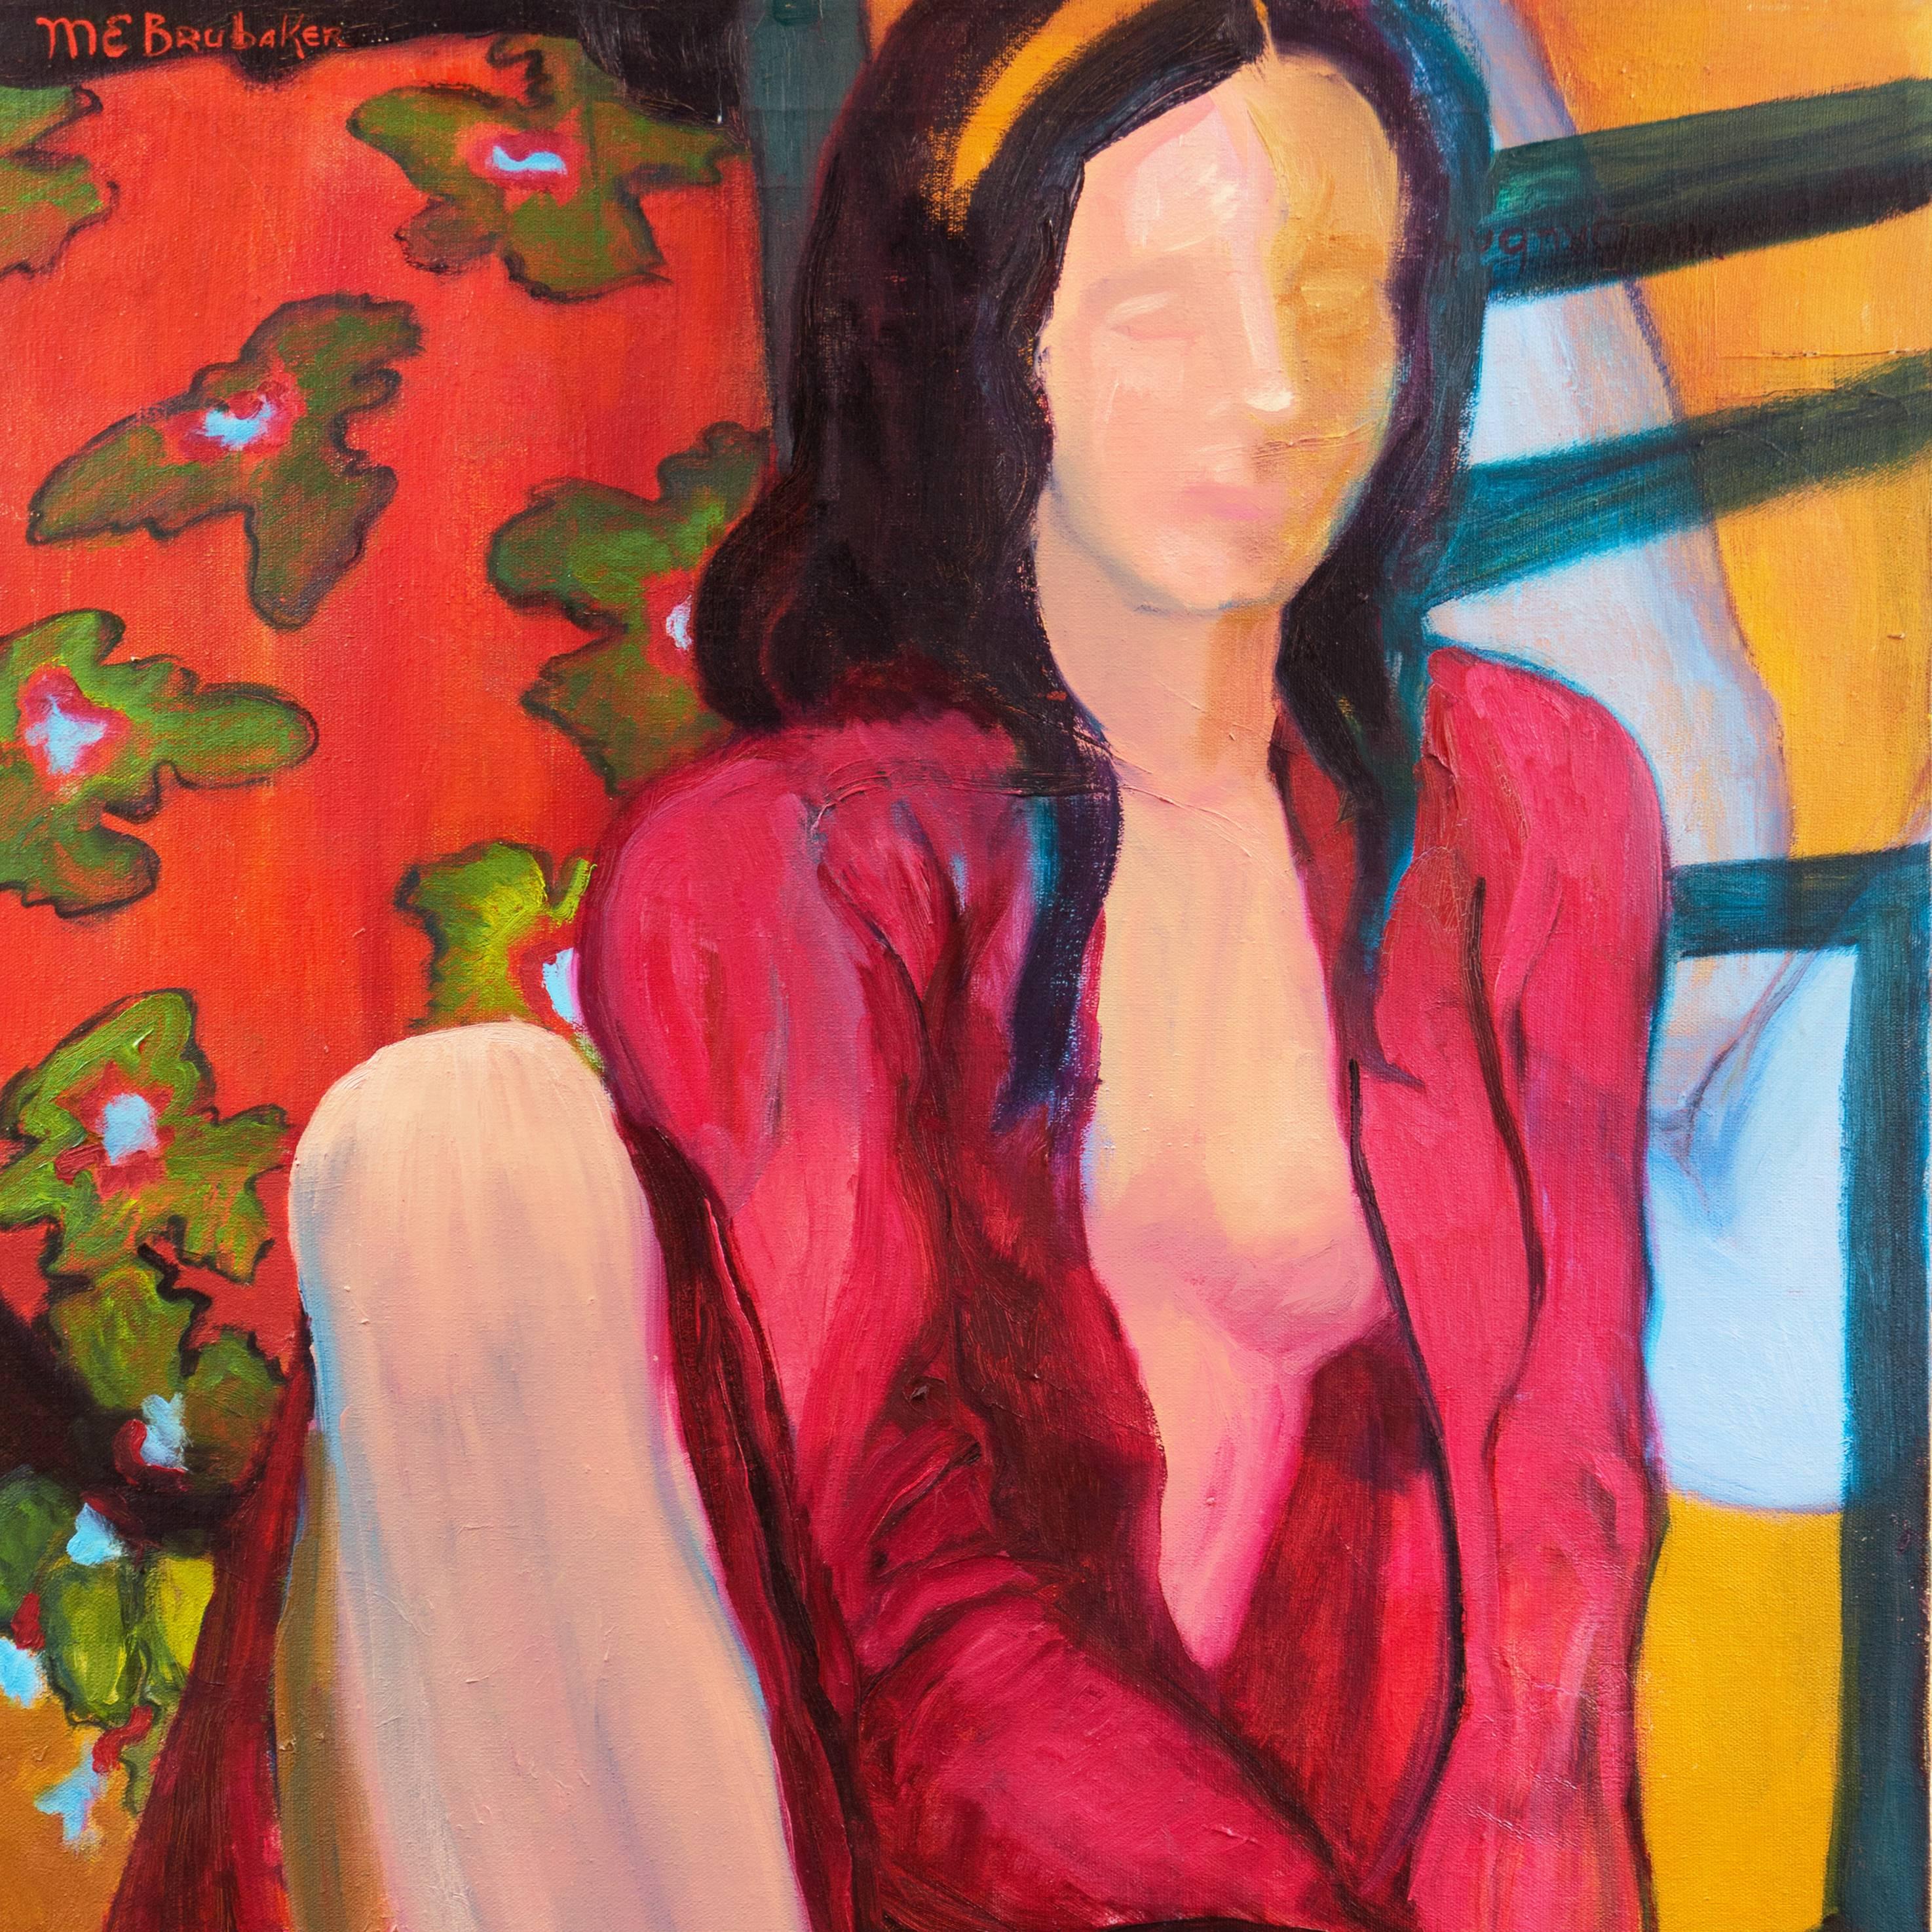 Young Woman Seated in Interior - Orange Figurative Painting by Molly E. Brubaker